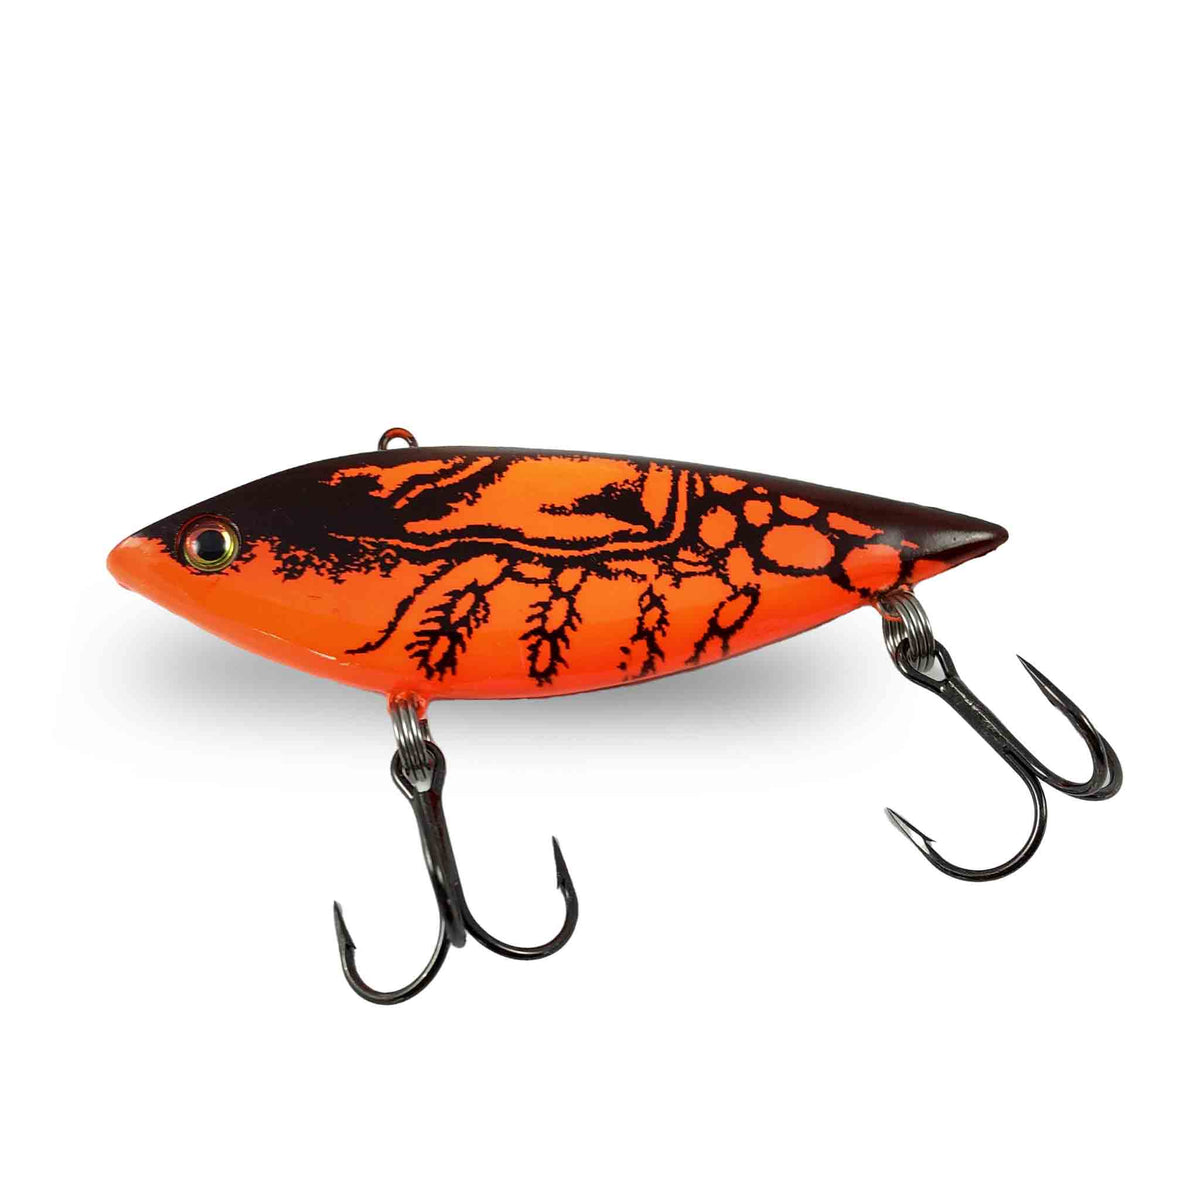 Cotton Cordell Super Spot Lures - All sizes/colors available